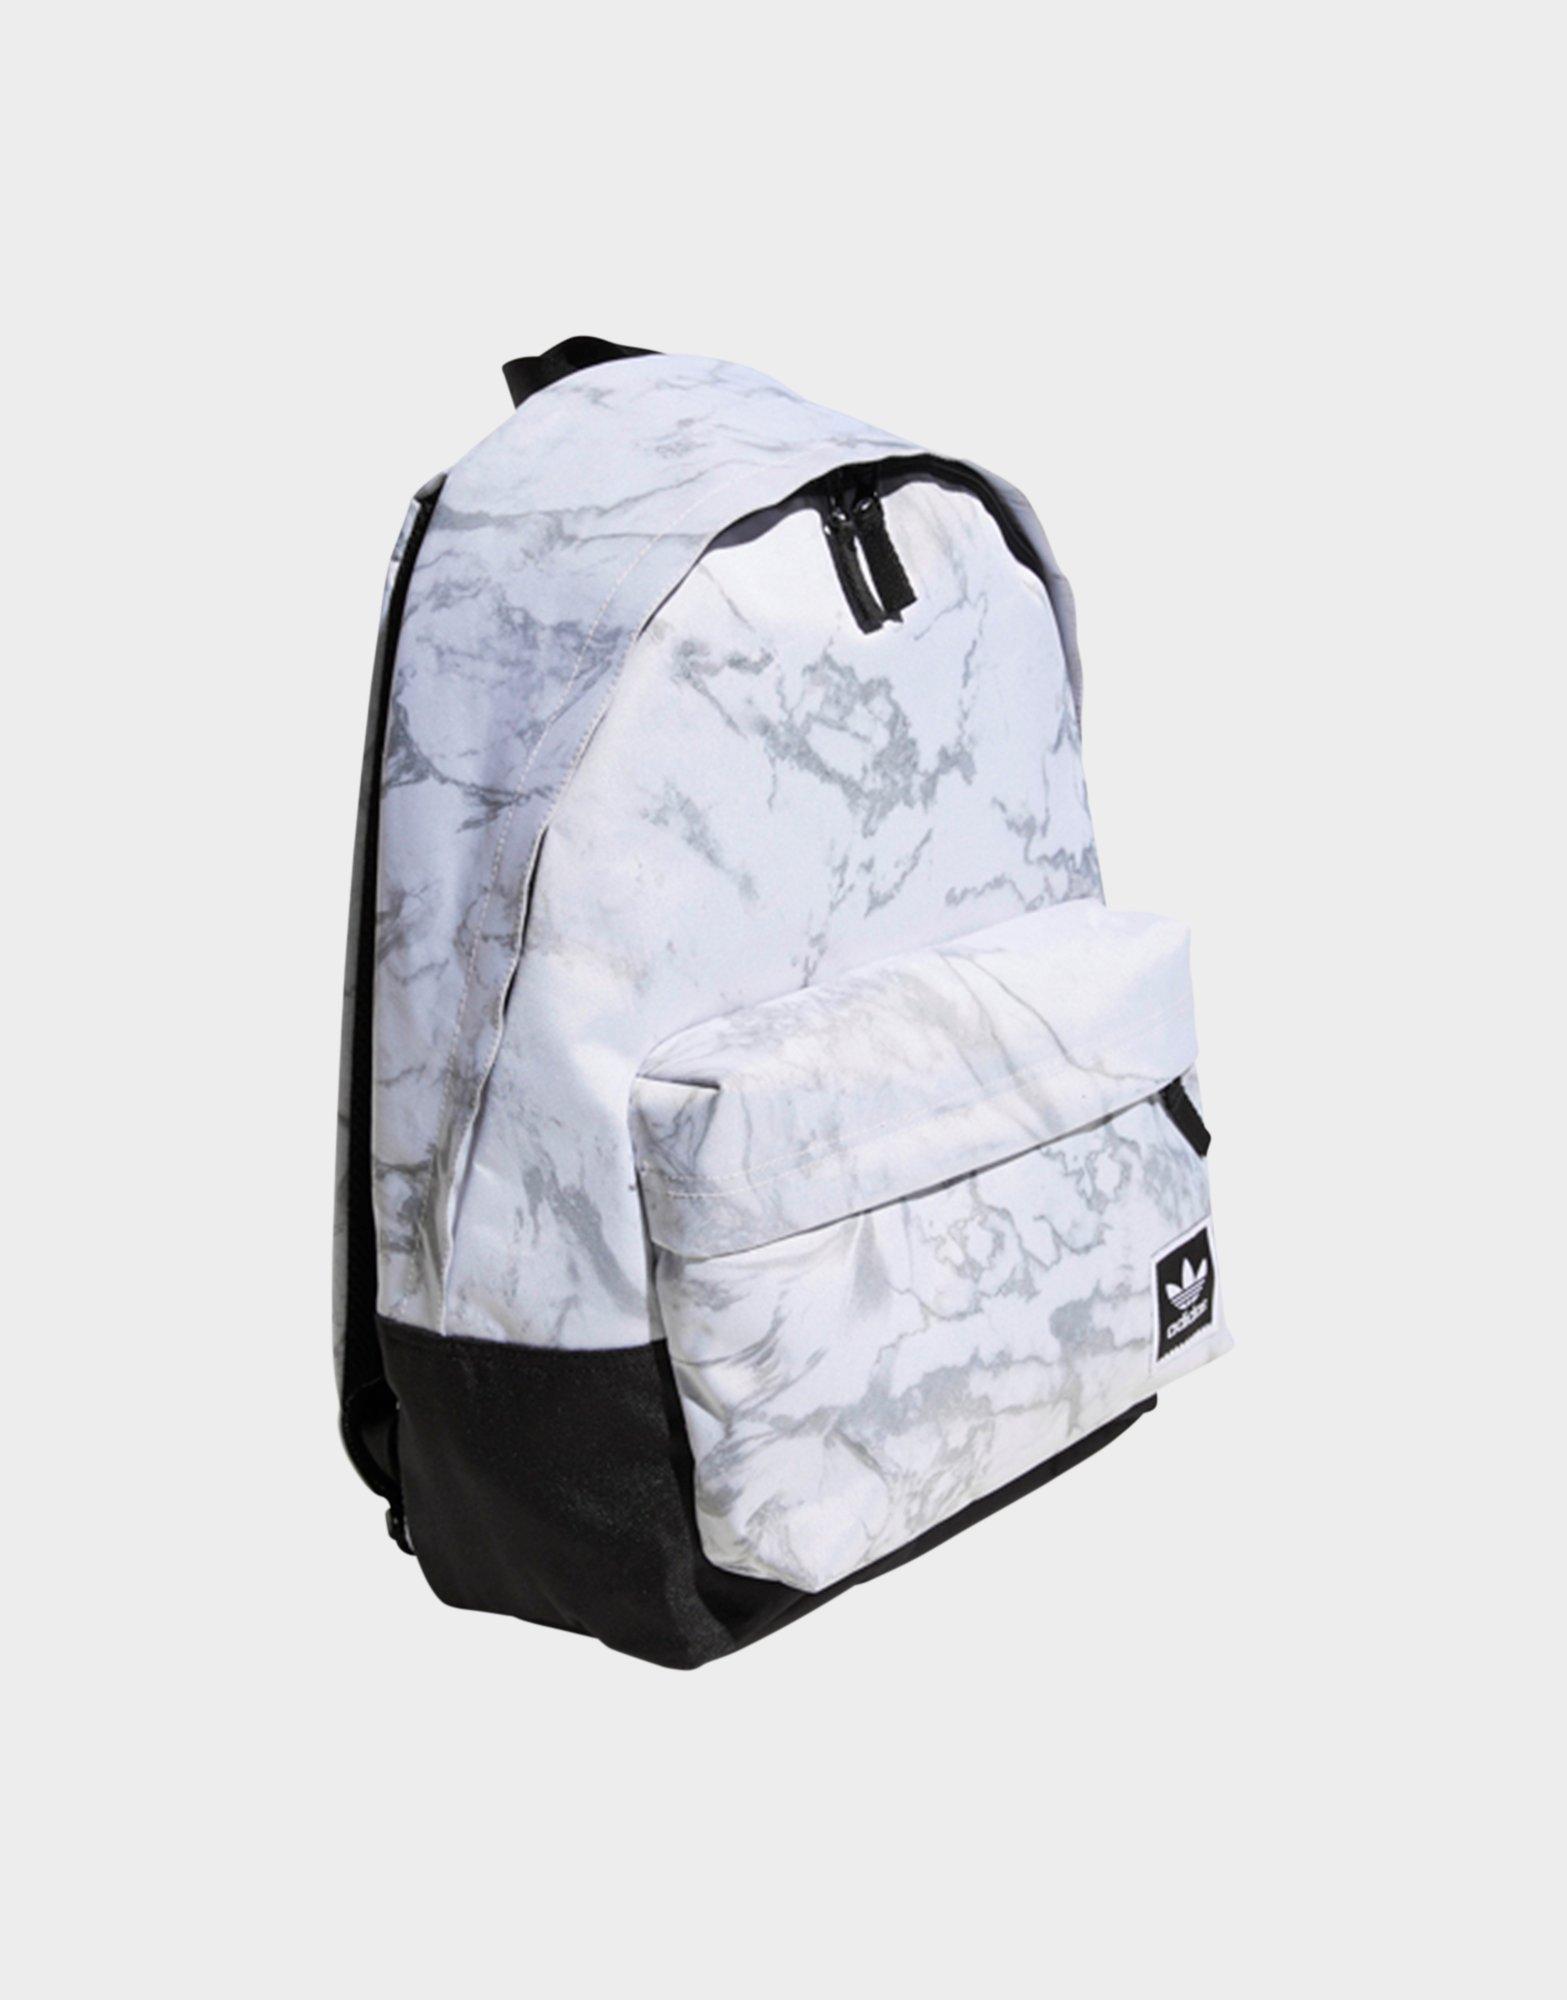 adidas backpack marble